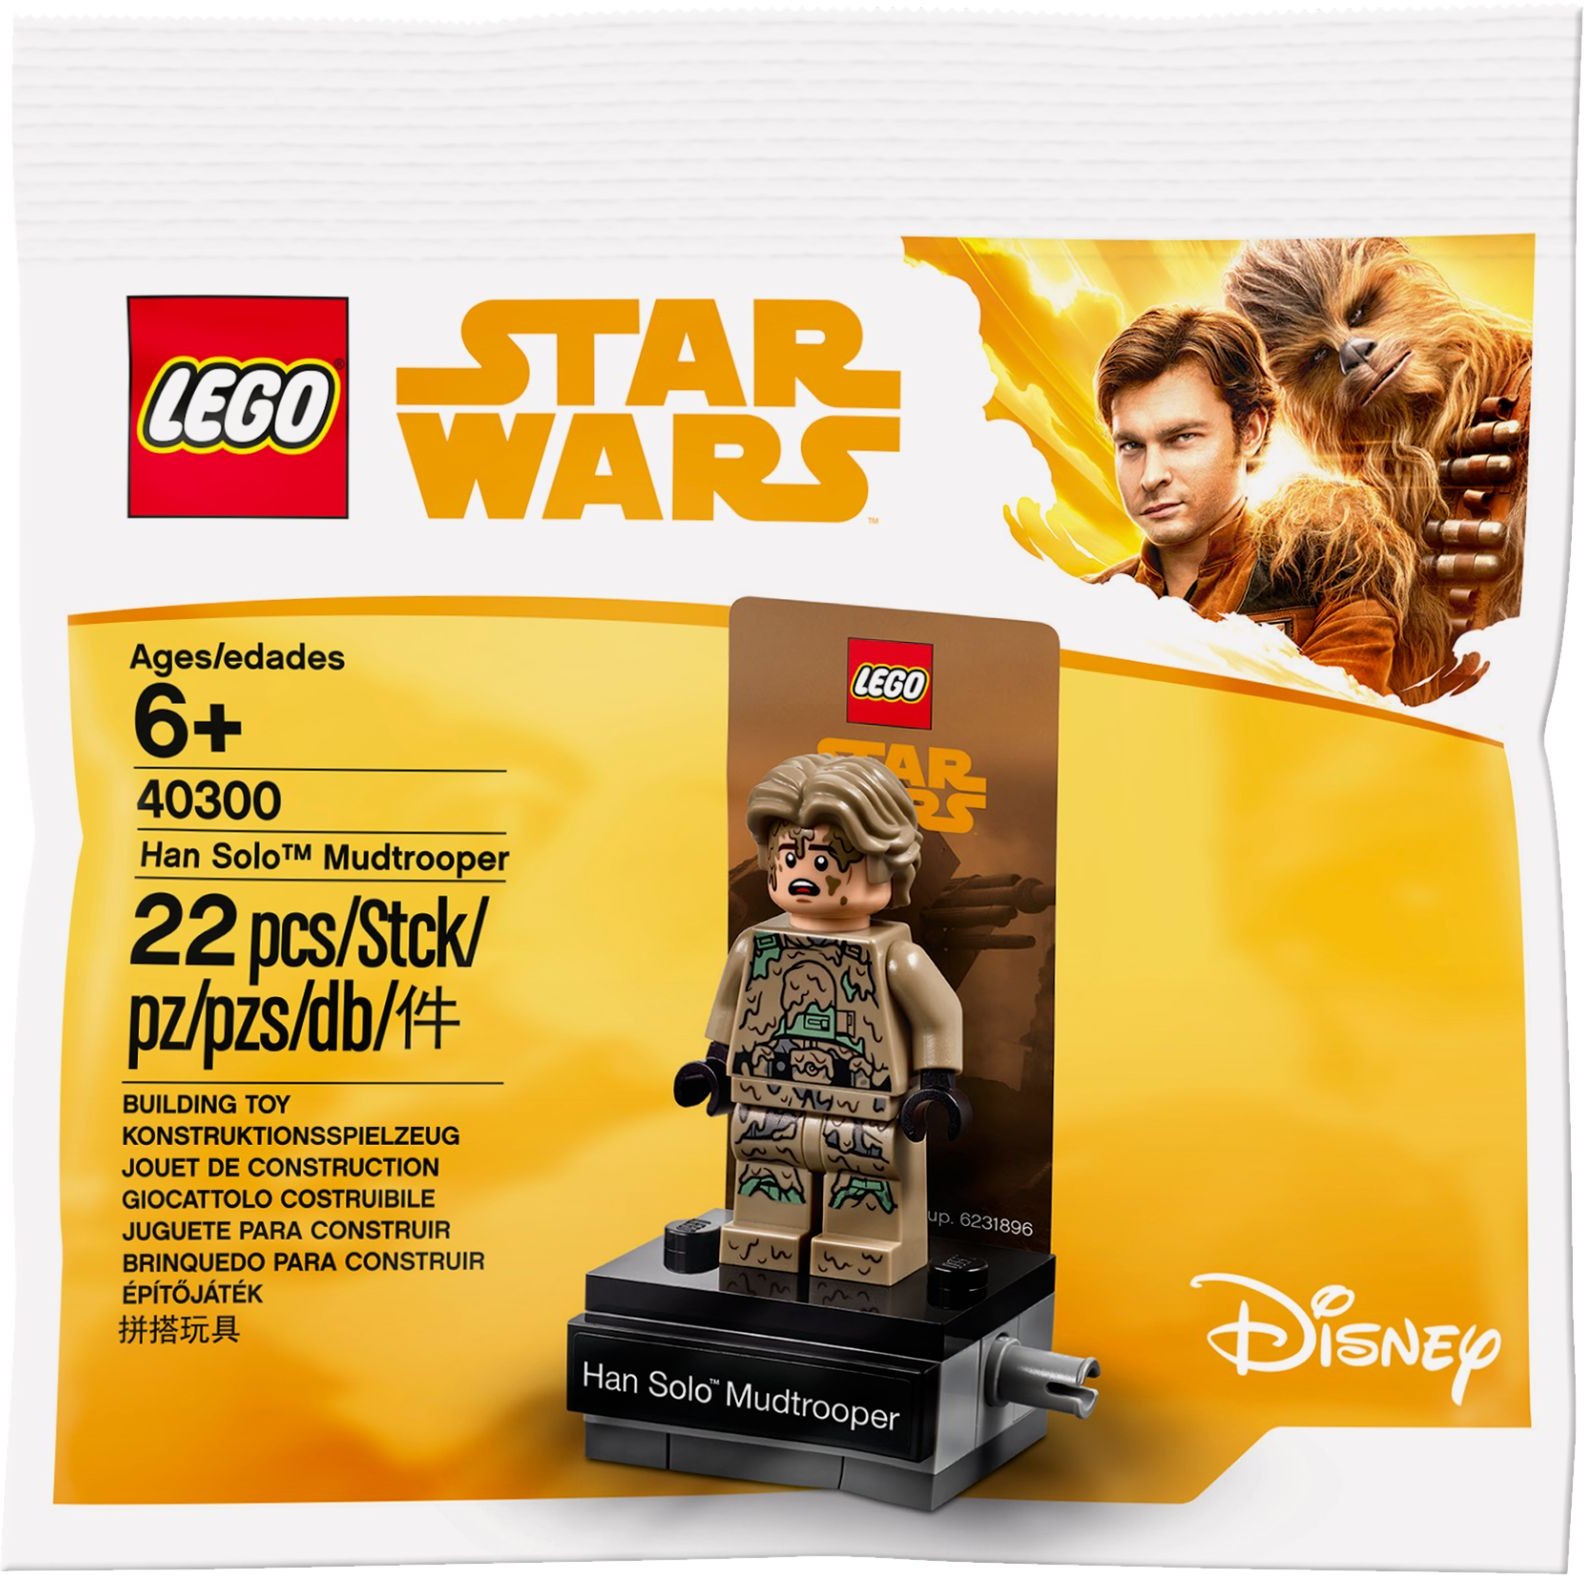 NEW LEGO HAN SOLO FROM SET 75212 STAR WARS SOLO SW0921 